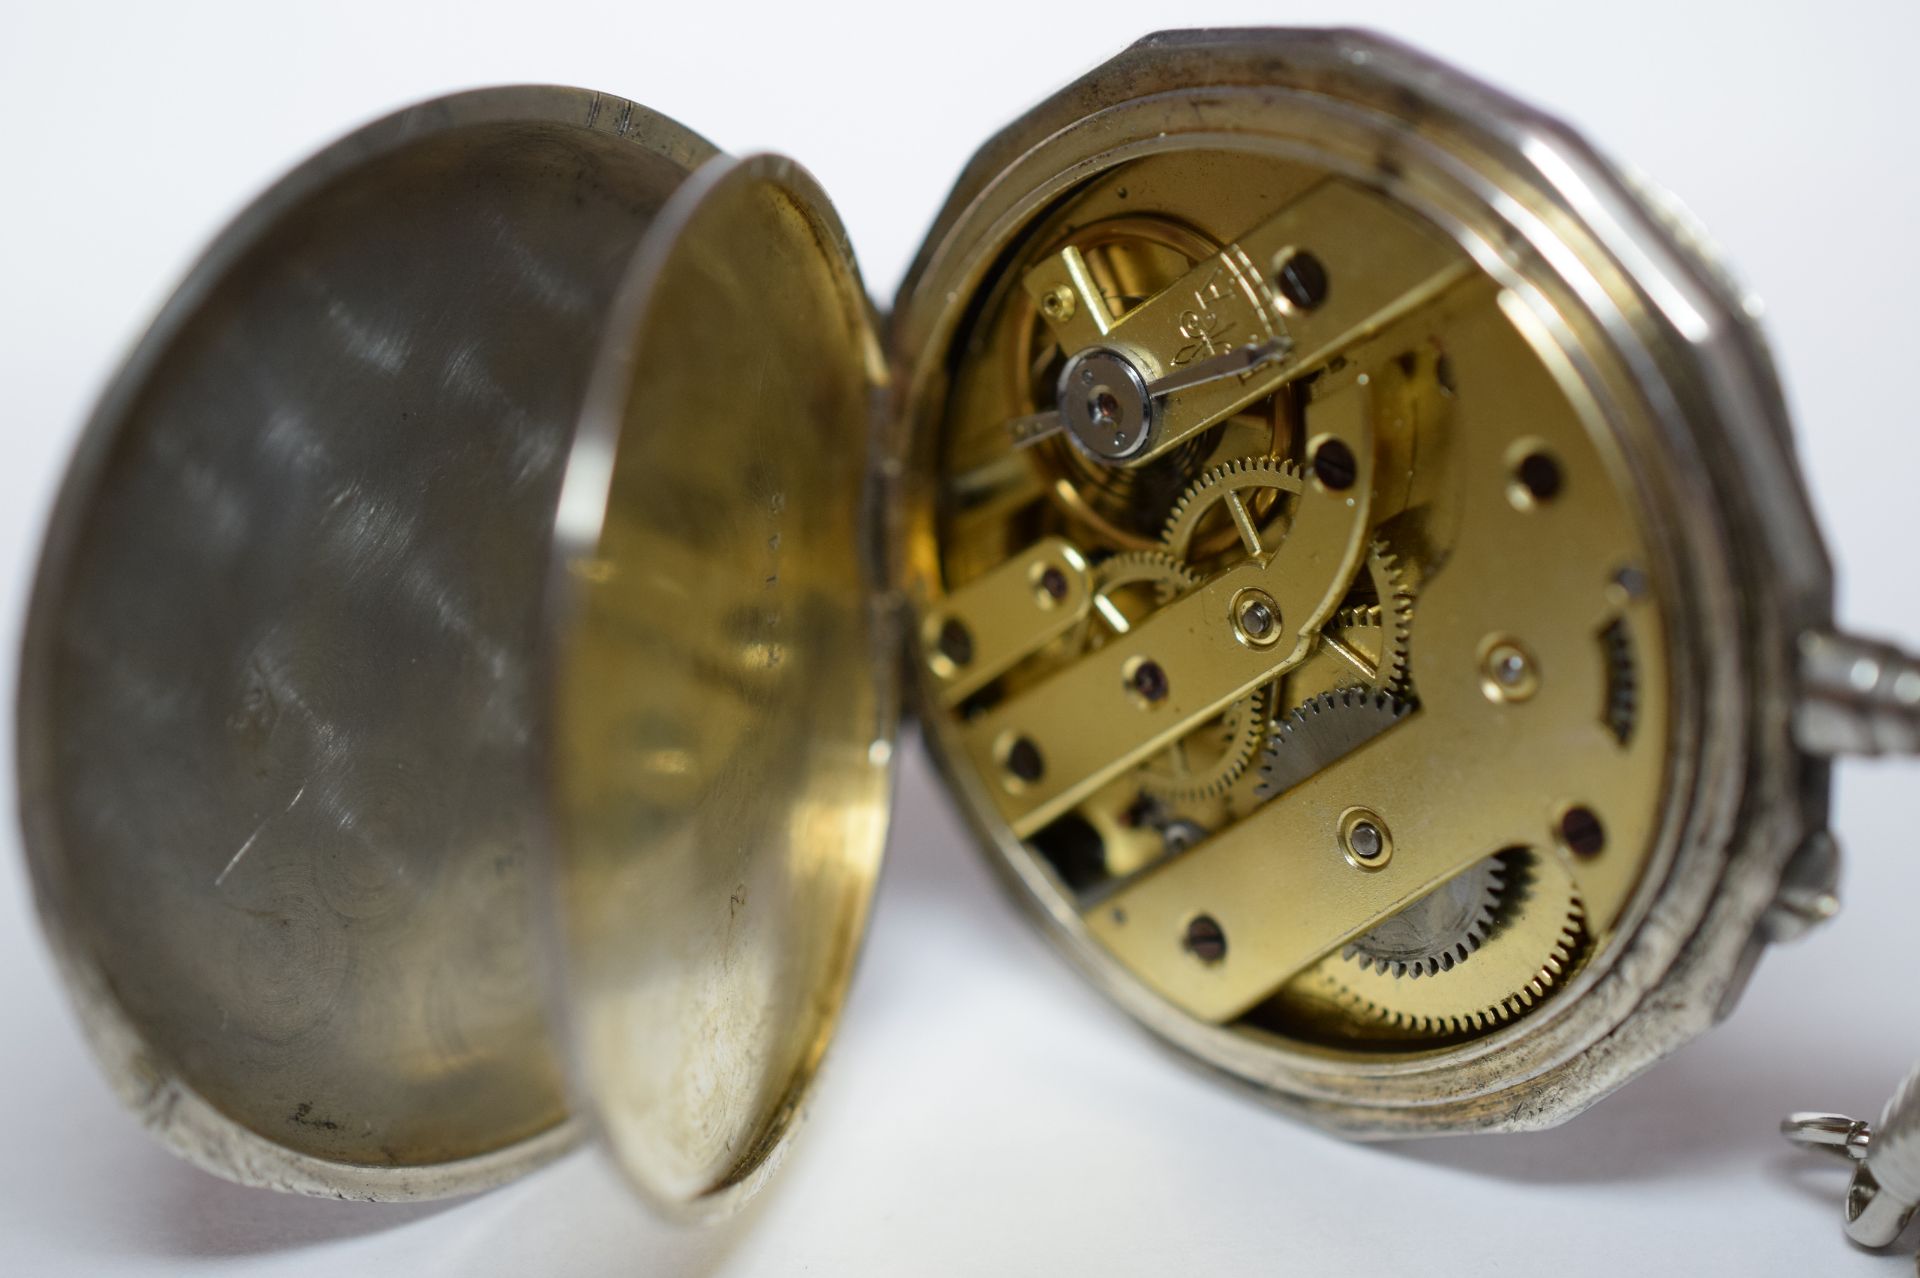 Silver Cased French Pocket Watch With Movement Signed C.Crettiez On Display Stand - Image 6 of 9